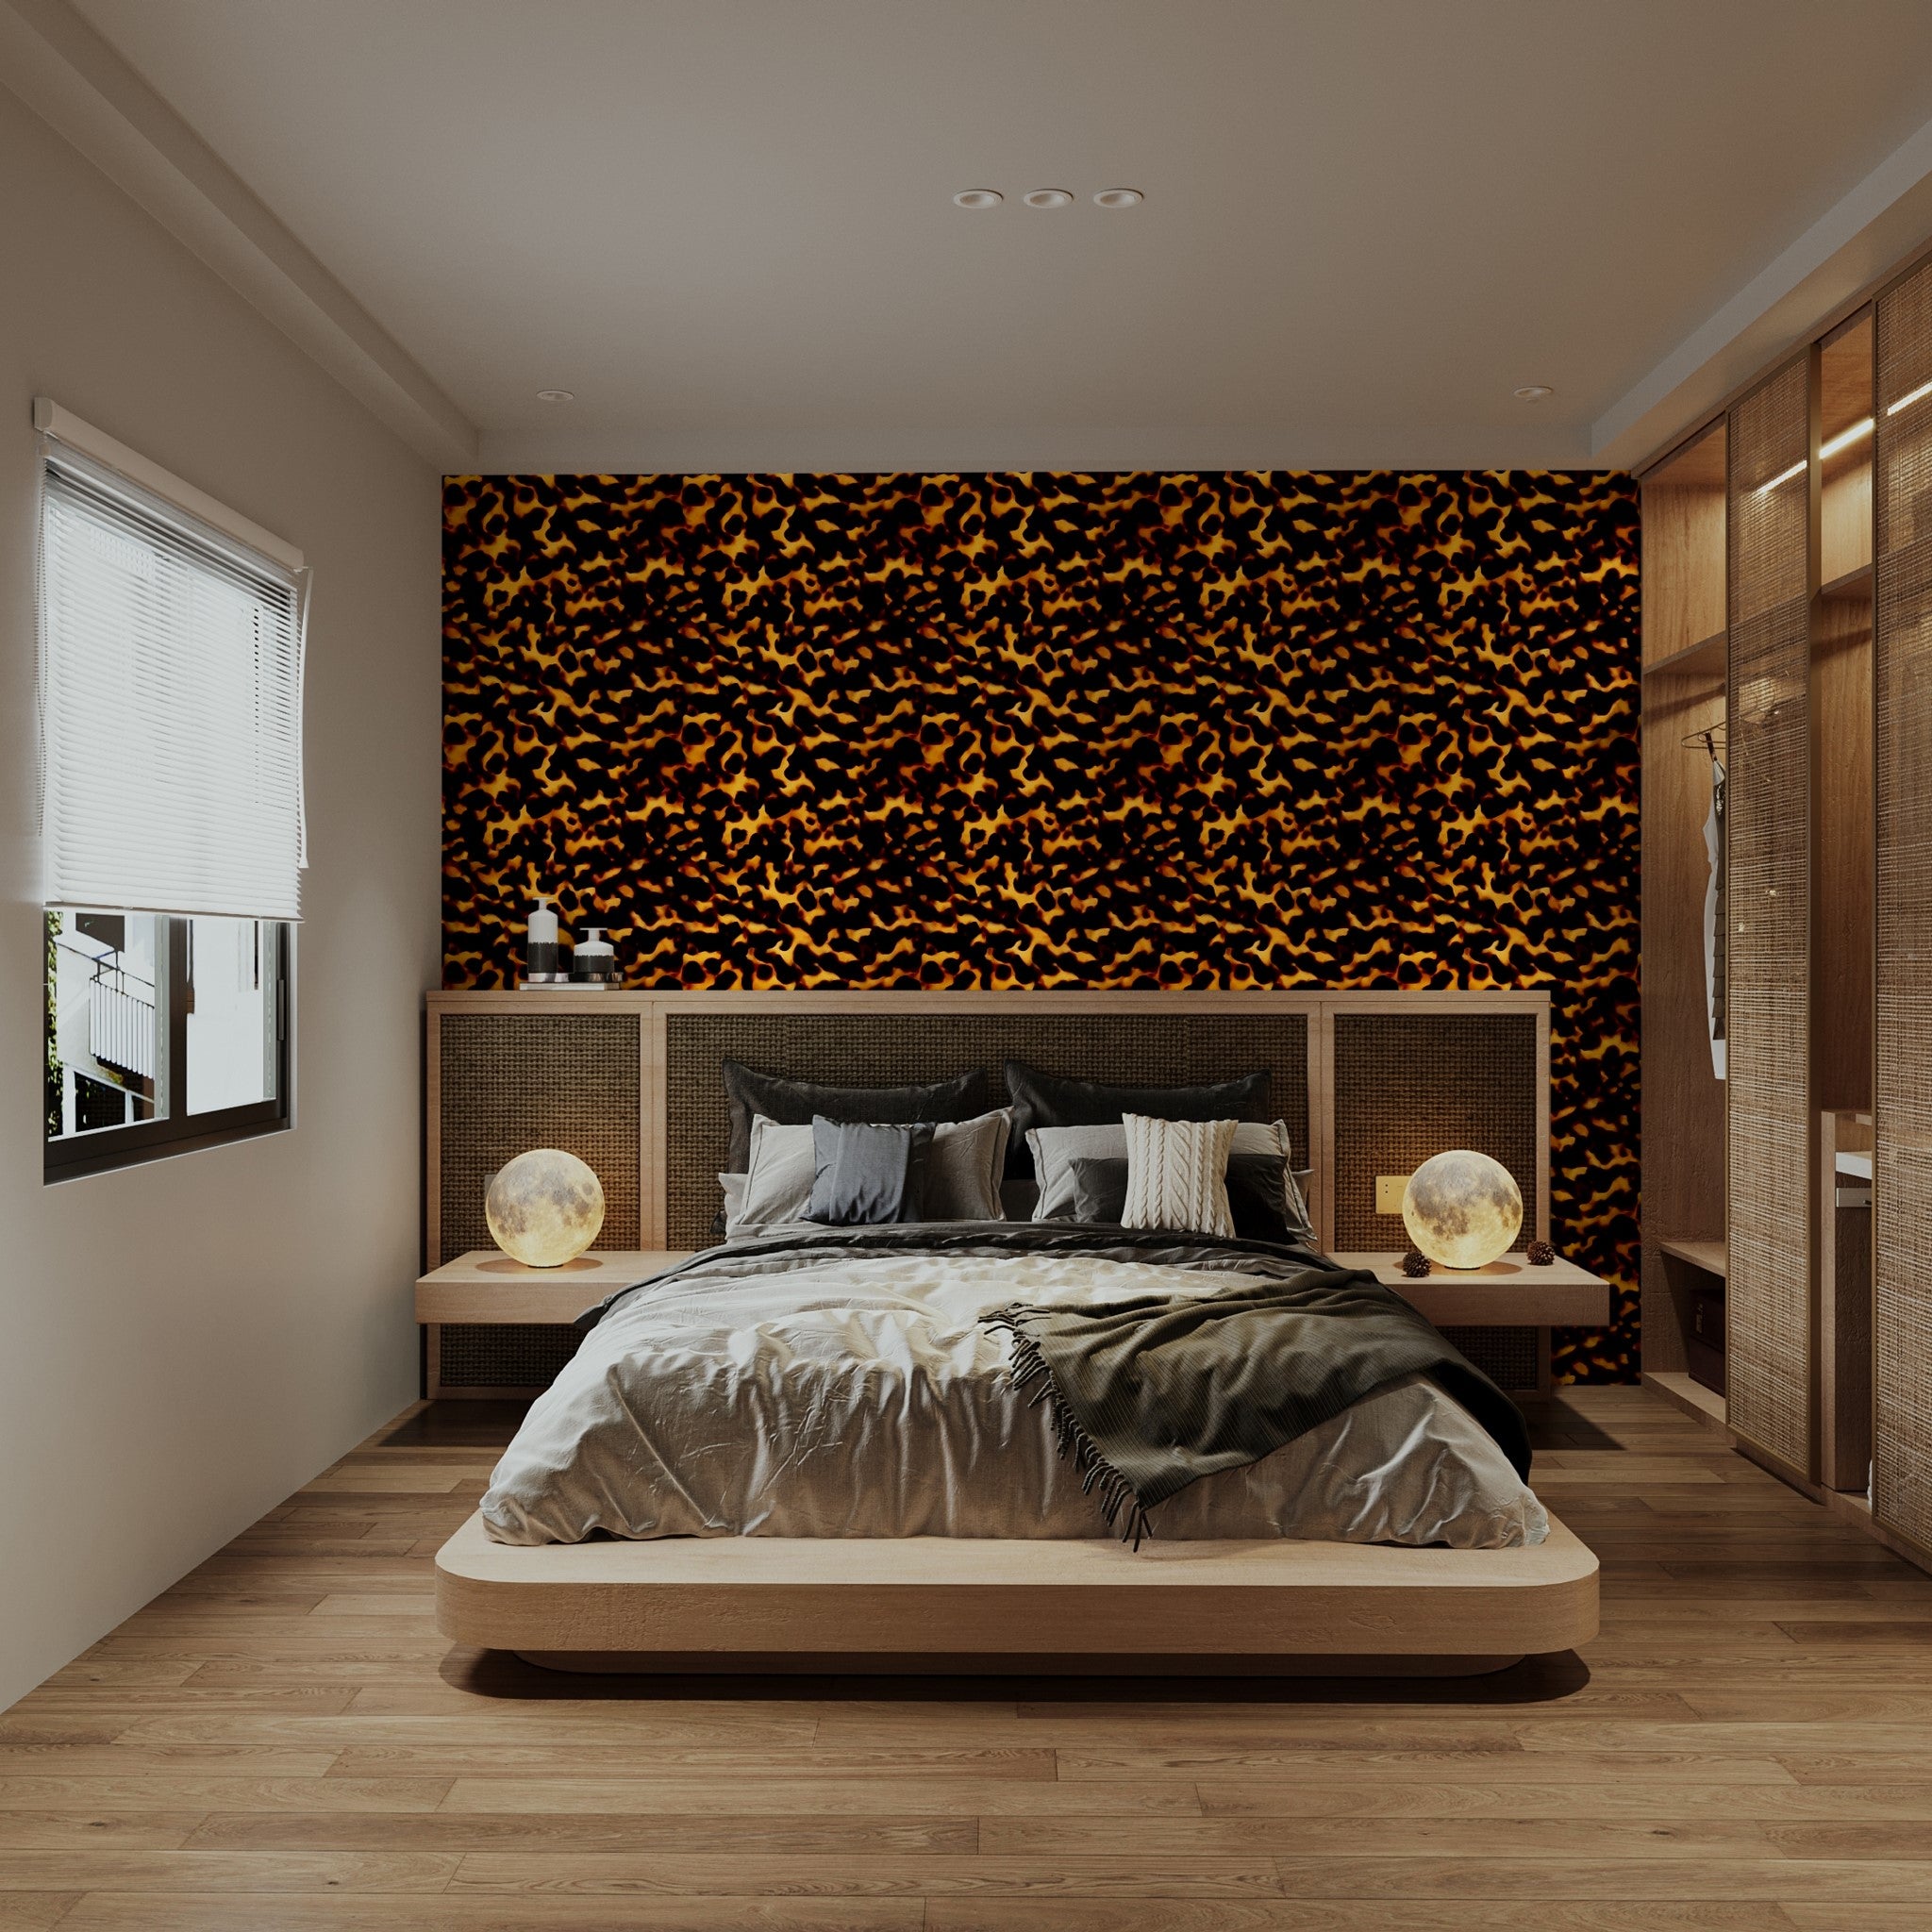 "Hathaway Wallpaper by Wall Blush accentuating modern bedroom decor with bold design focus"